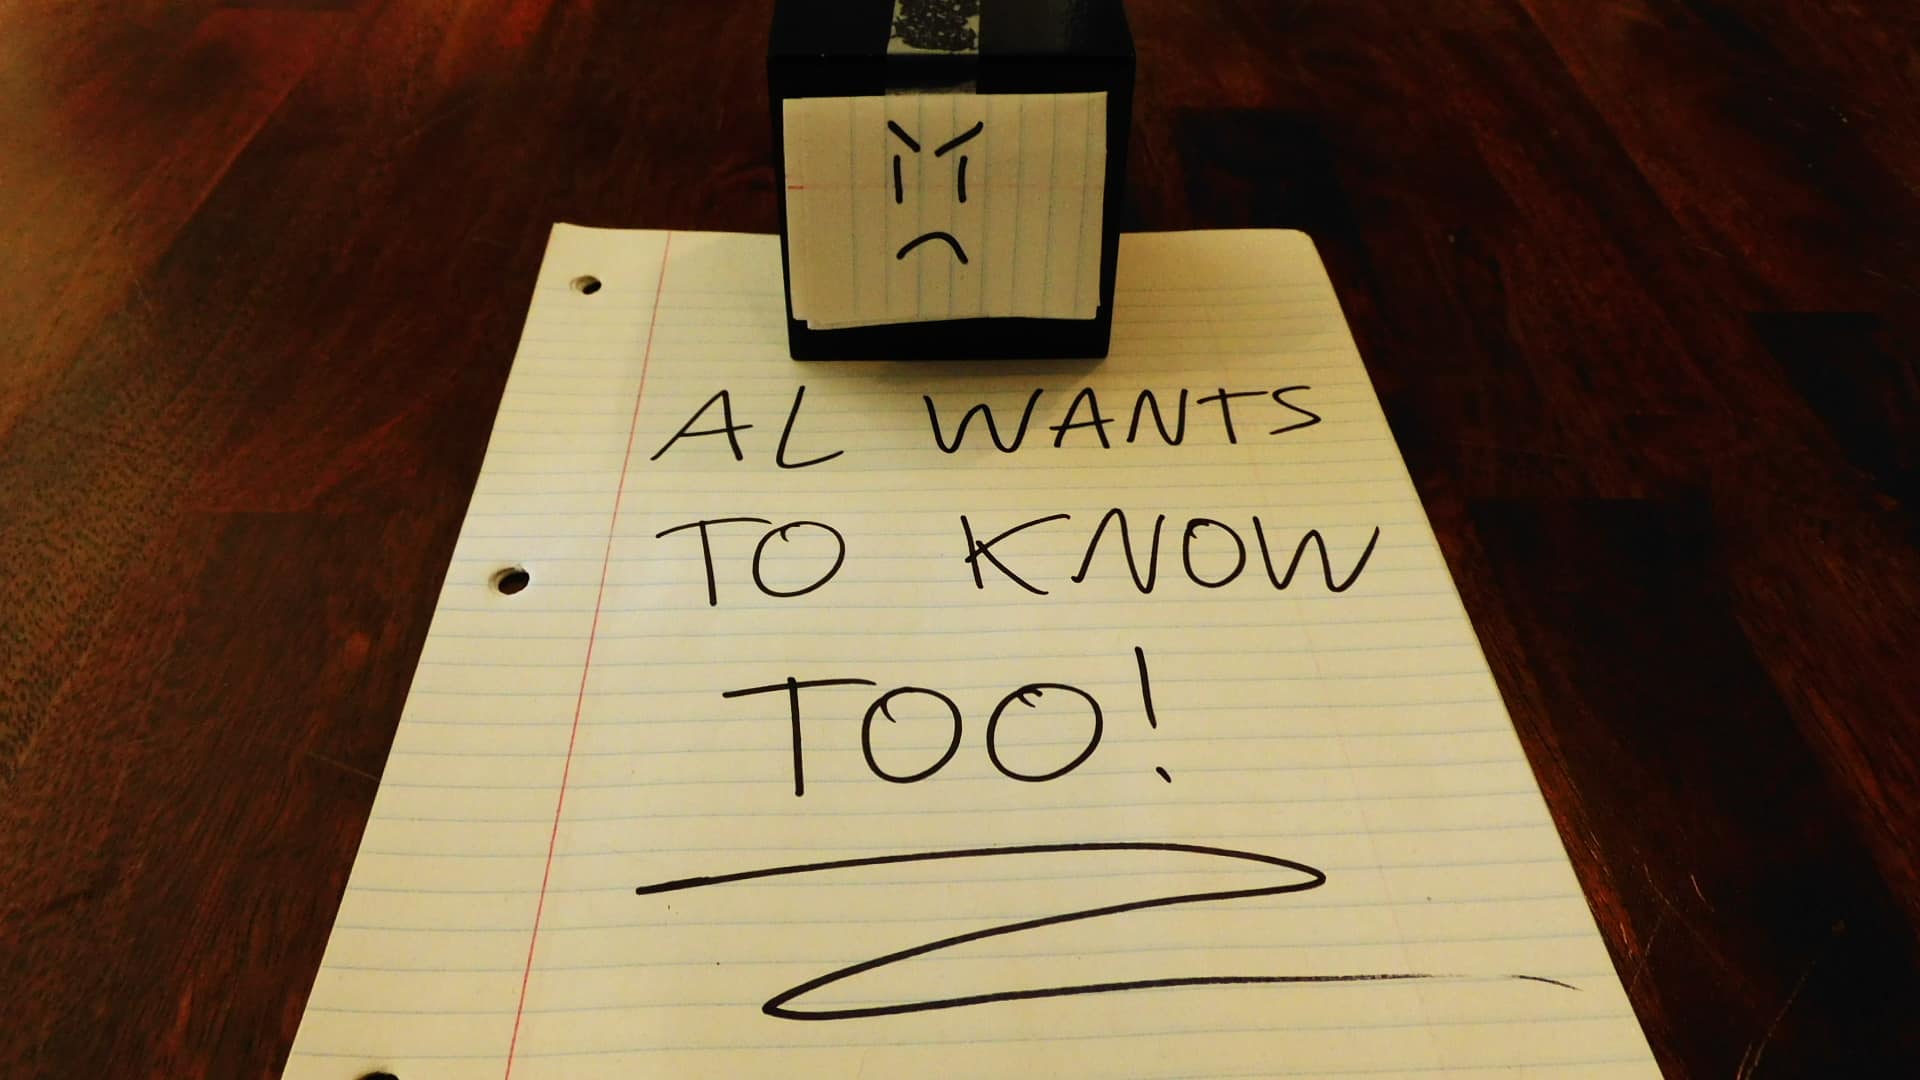 Alpha Gamer Al sitting on a piece of paper that says, "AL WANTS TO KNOW TOO!"